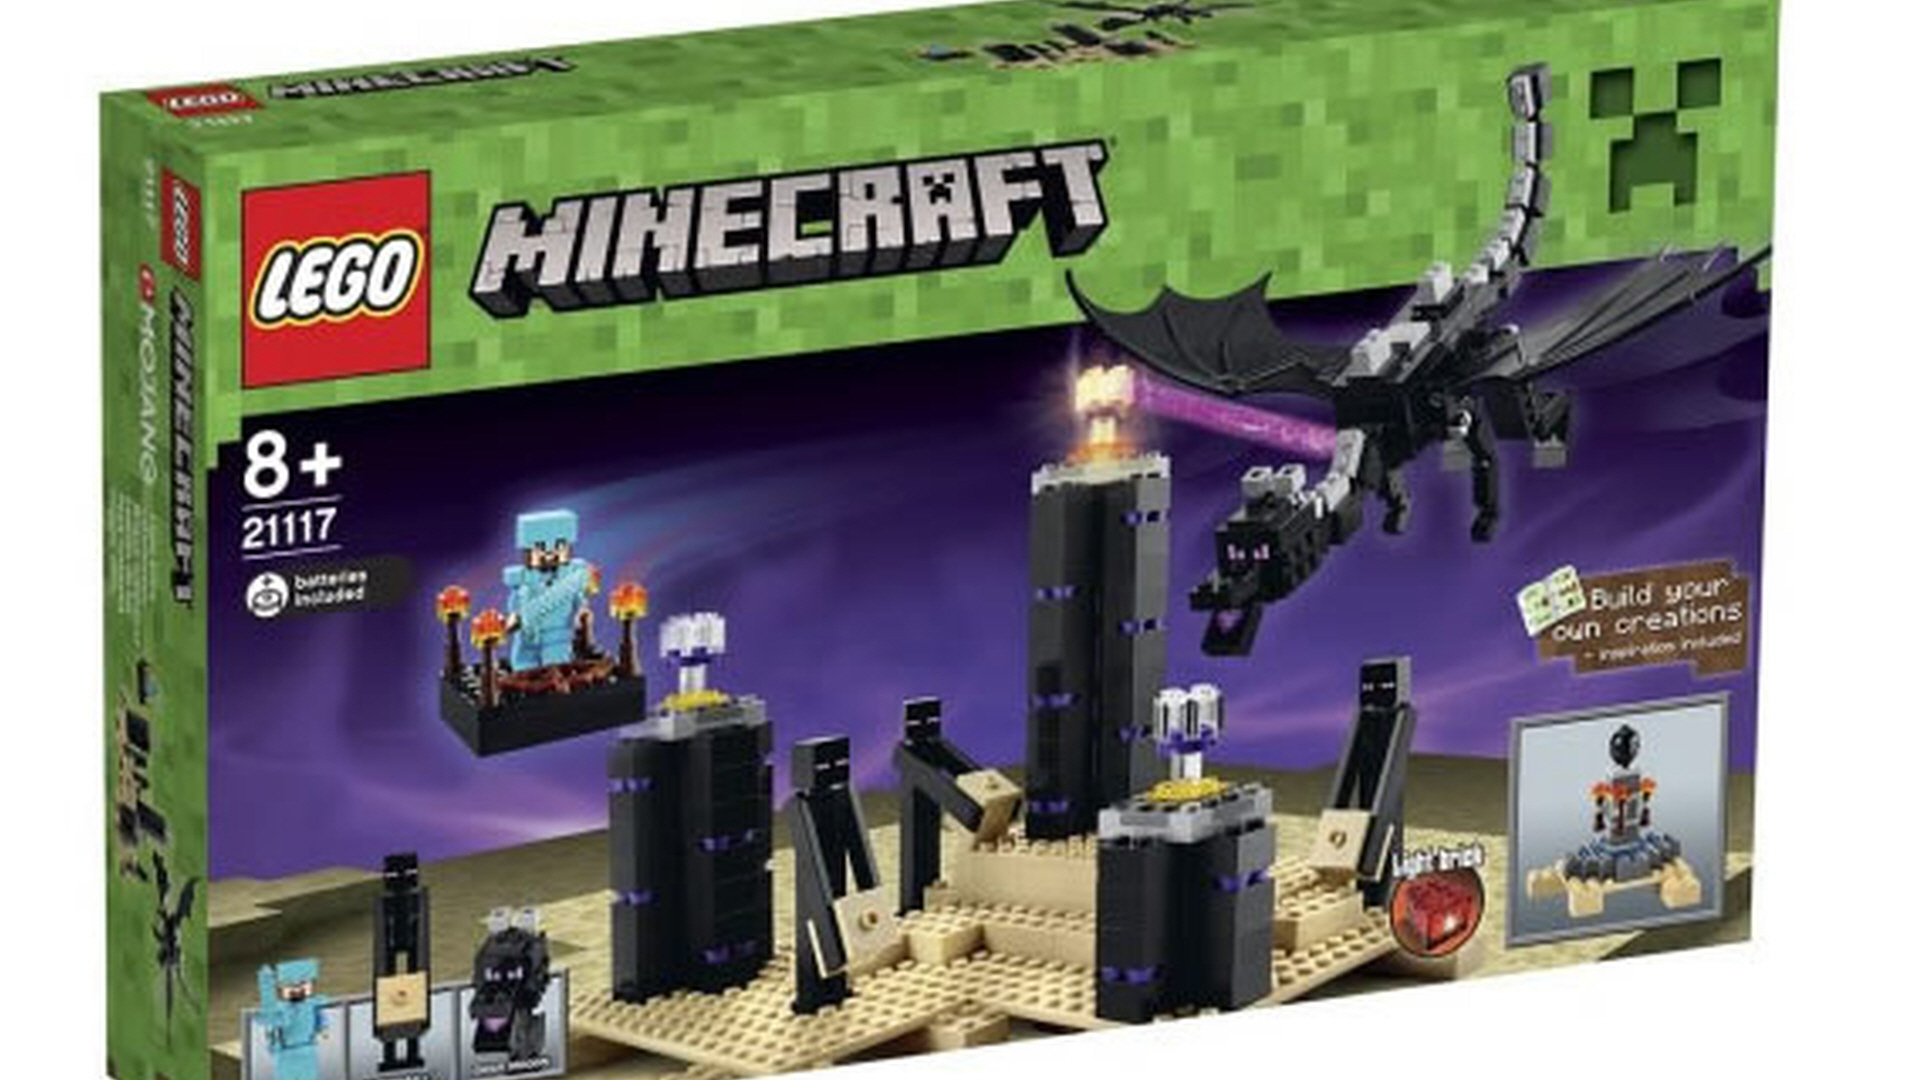 Lego Minecraft Set Pictures Revealed 2015brickultra Home To News